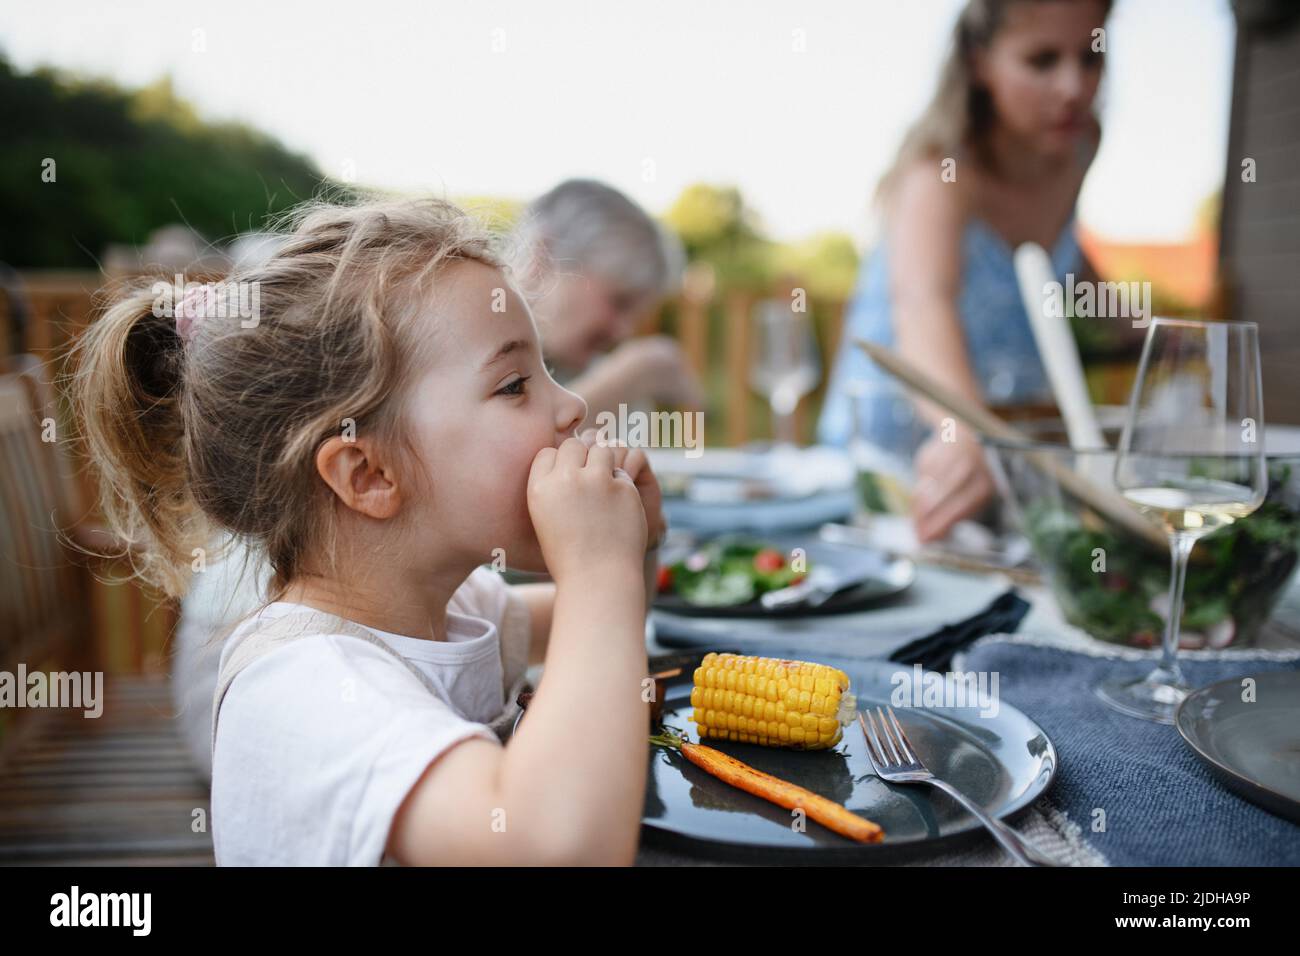 Family eating at barbecue party dinner on patio, little girl eating roasted corn and enjoying it. Stock Photo